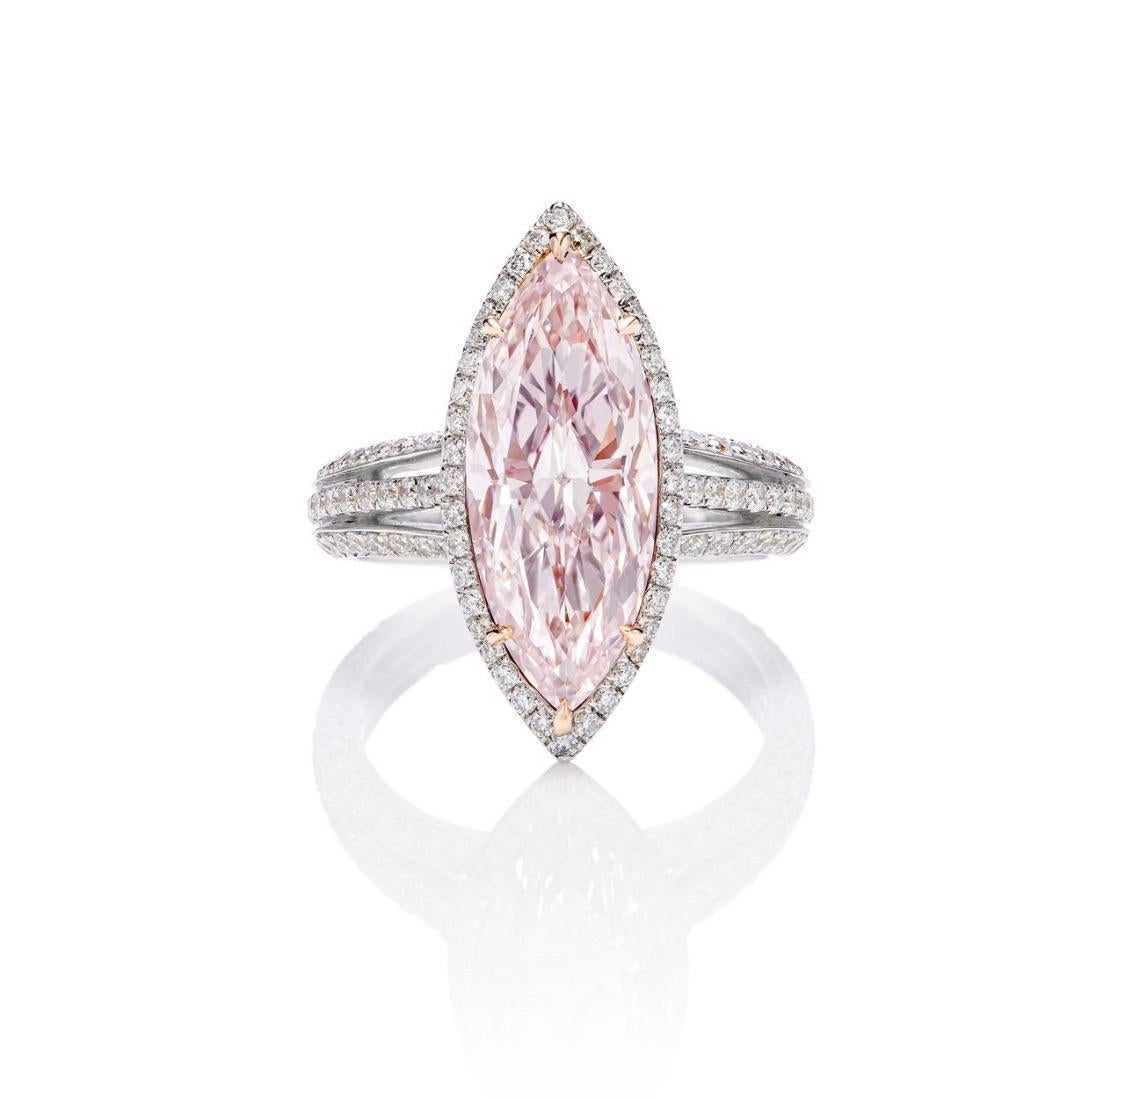 From The Museum Vault at Emilio Jewelry Located on New York's iconic Fifth Avenue,
Showcasing a very special and rare Gia certified natural marquise shape natural pink diamond weighing over 4.00 carats. We specialize in creating special mountings